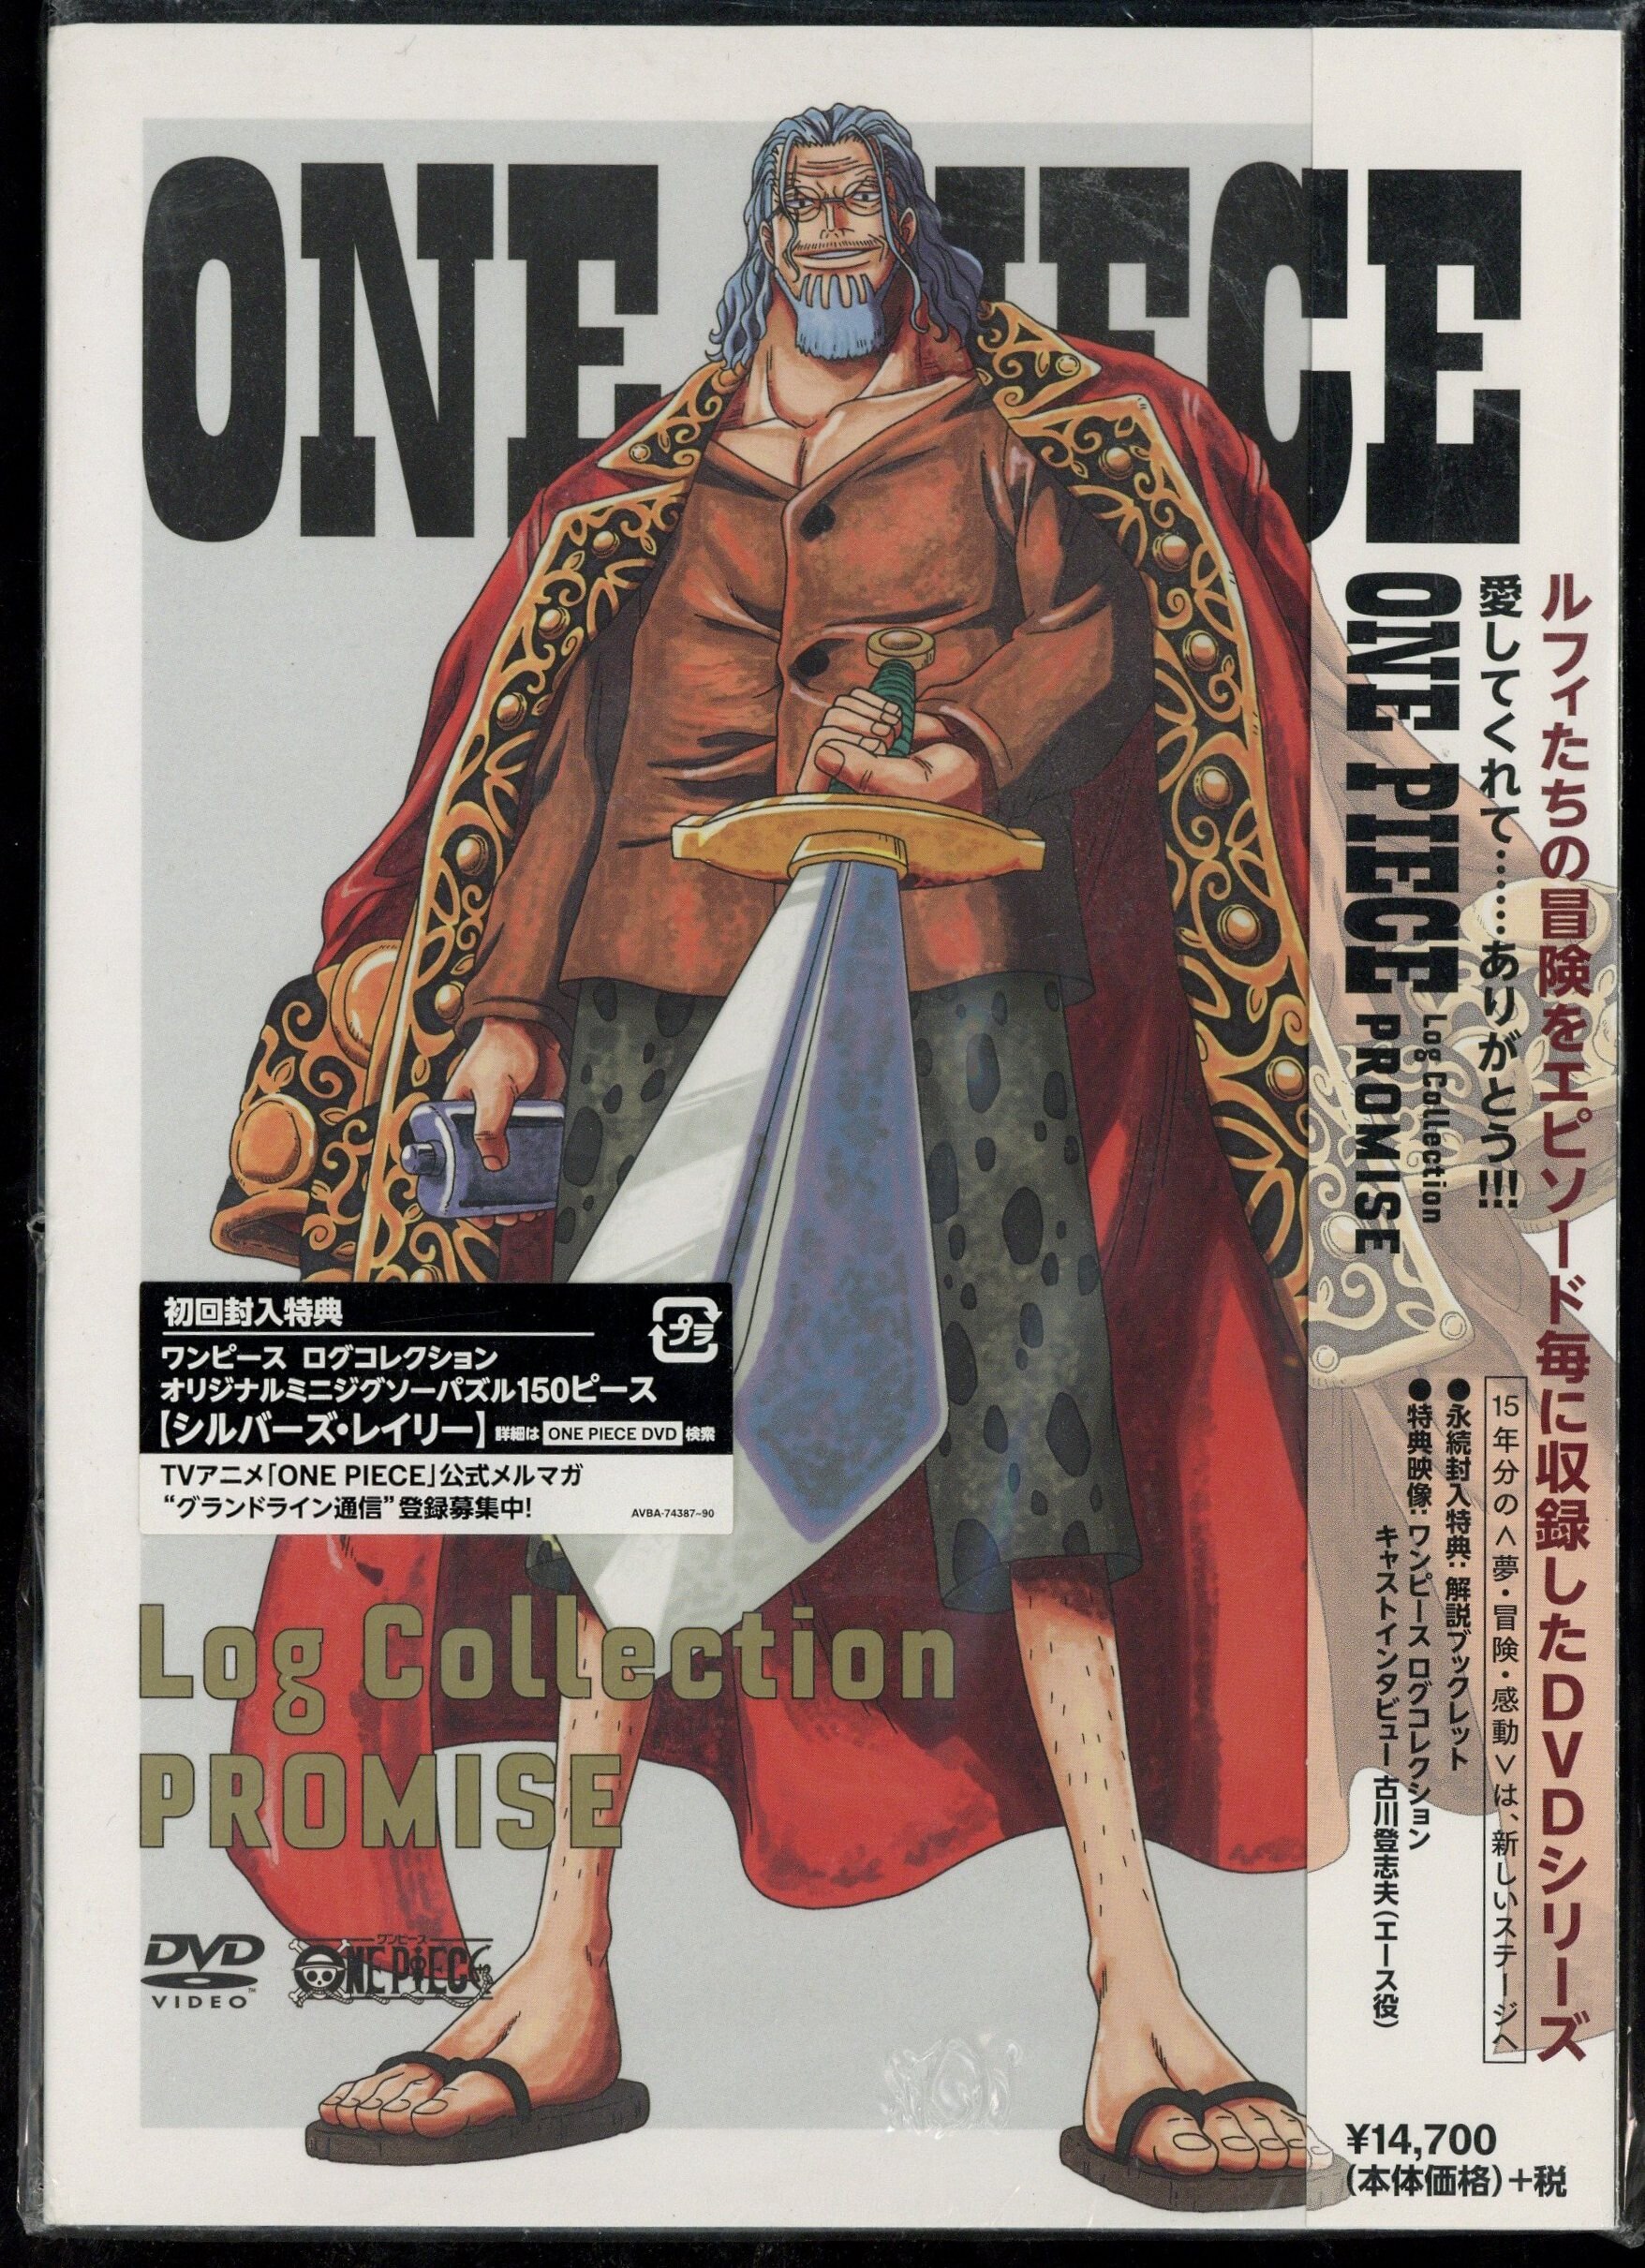 Avex Pictures Anime DVD First edition) ONE PIECE Log Collection